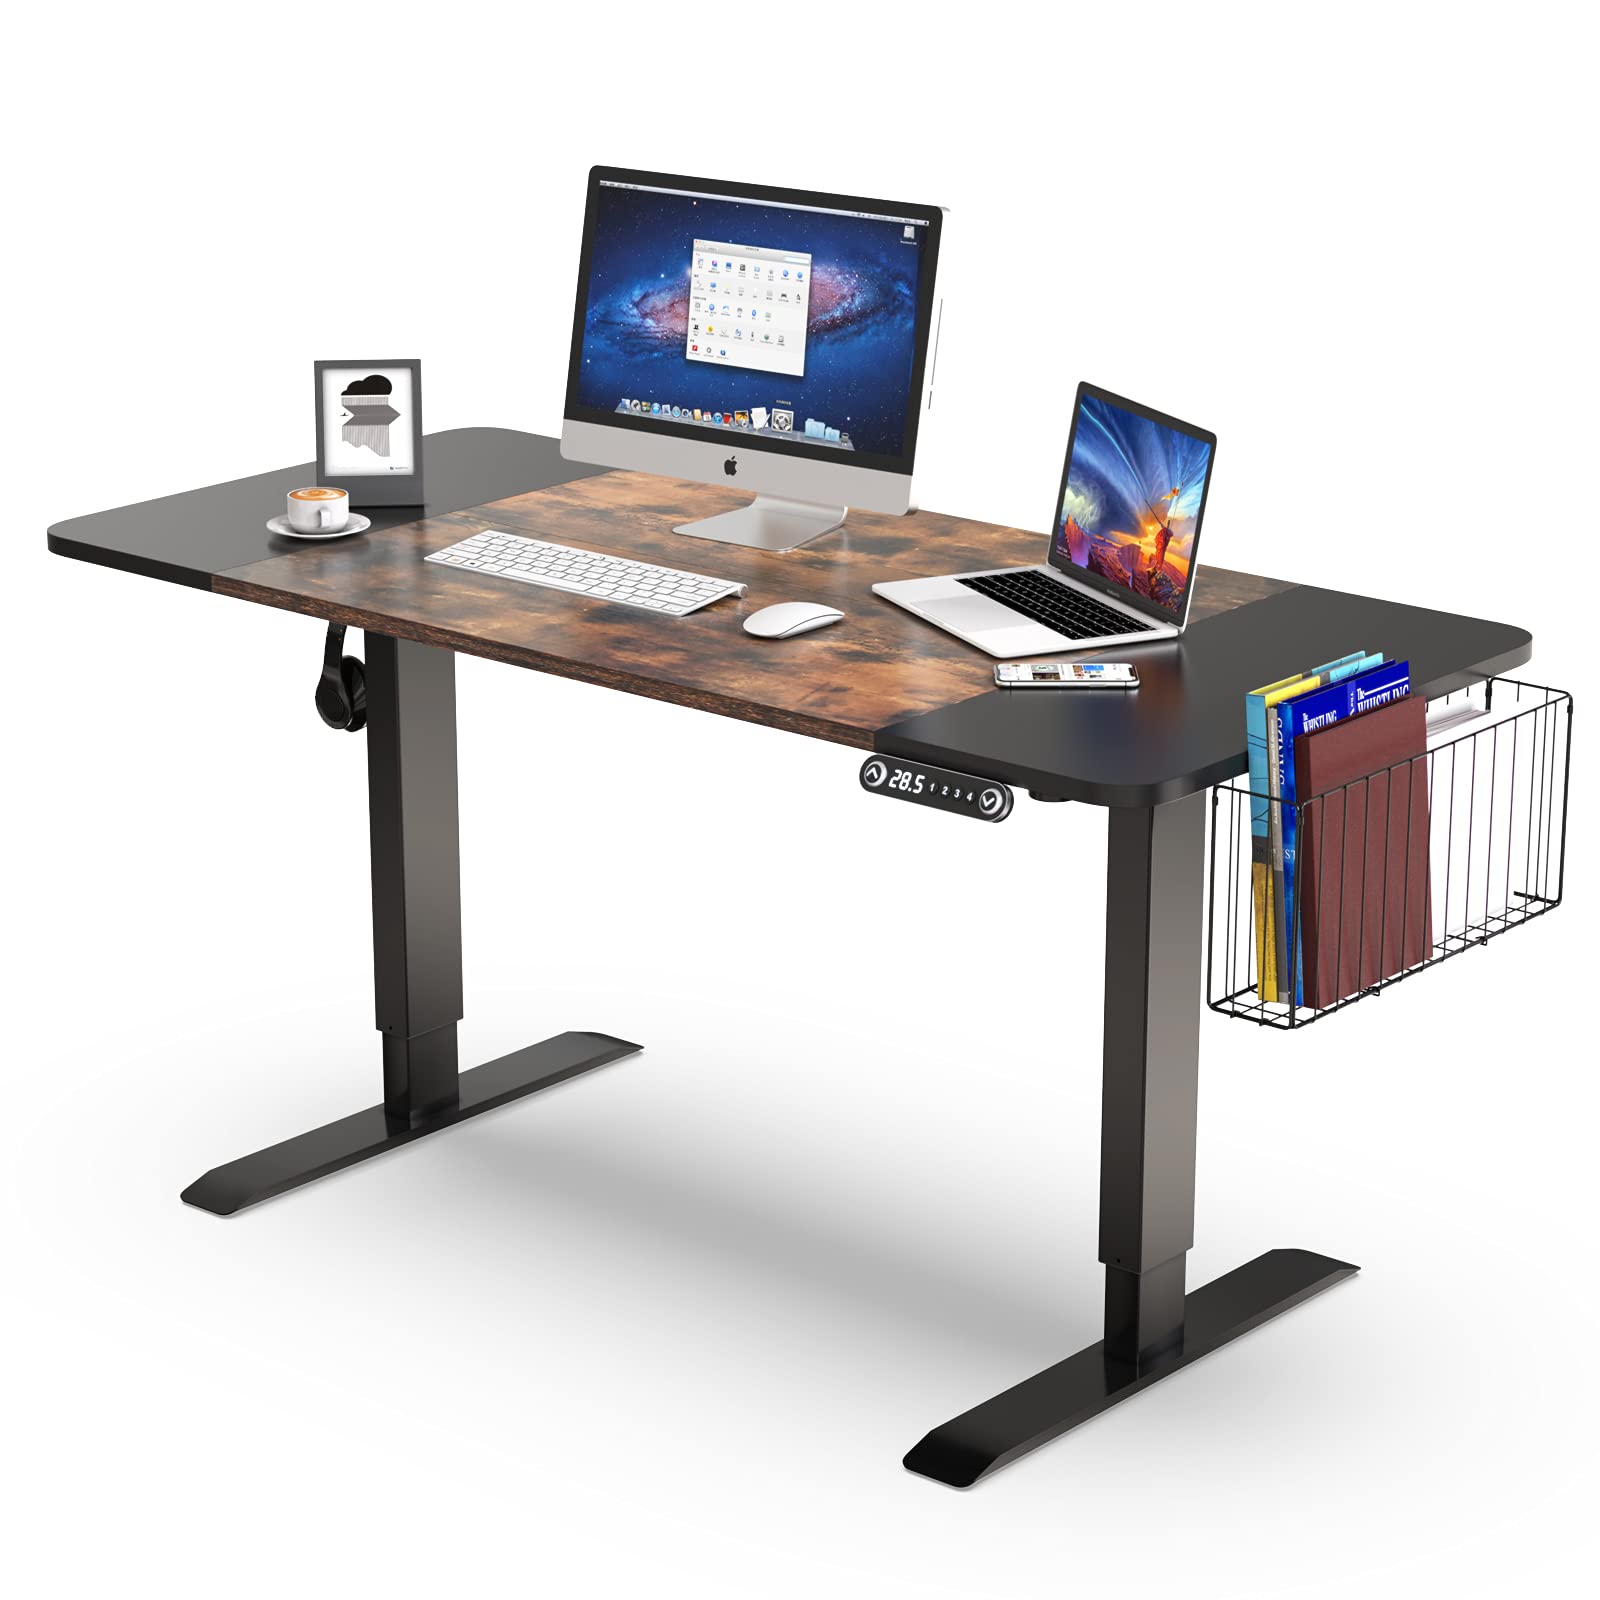 Easyzon Electric Standing Desk, Height Adjustable Stand Up Desk 55" Industrial Stand Small Computer Workstation with Storage Basket/Hook/Clip f...